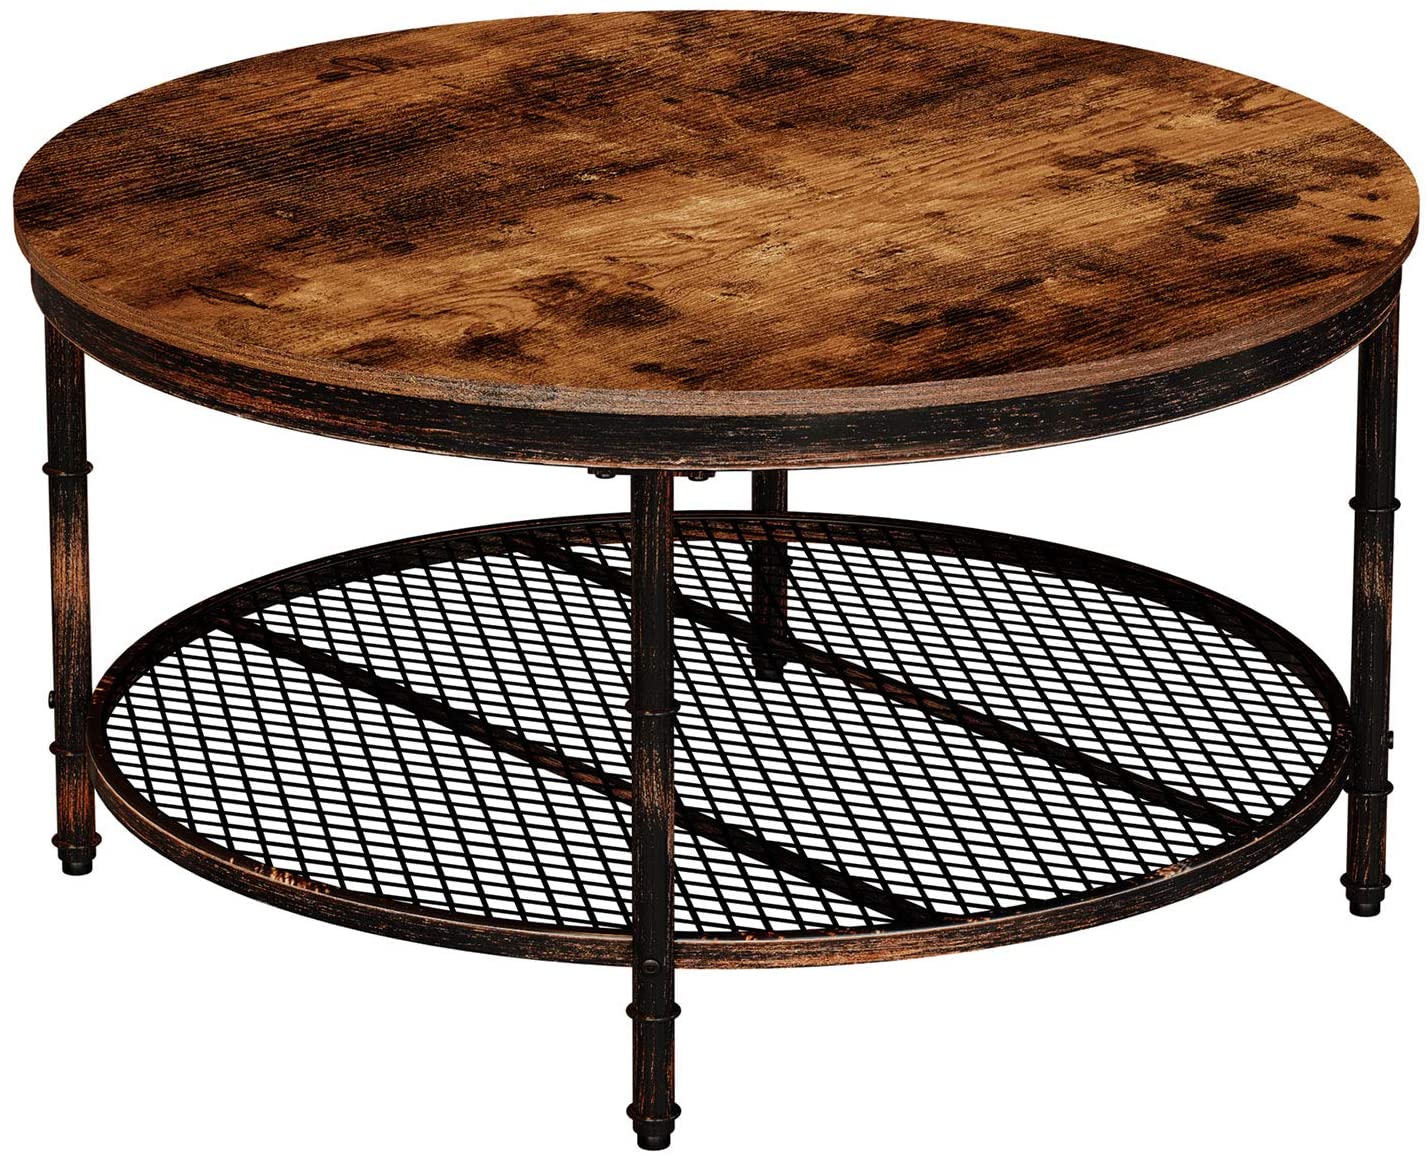 Rustic Style Vintage Design Stable Metal Frame Wood Round Coffee Table With Lower Metal Mesh Shelf Living Room Furniture